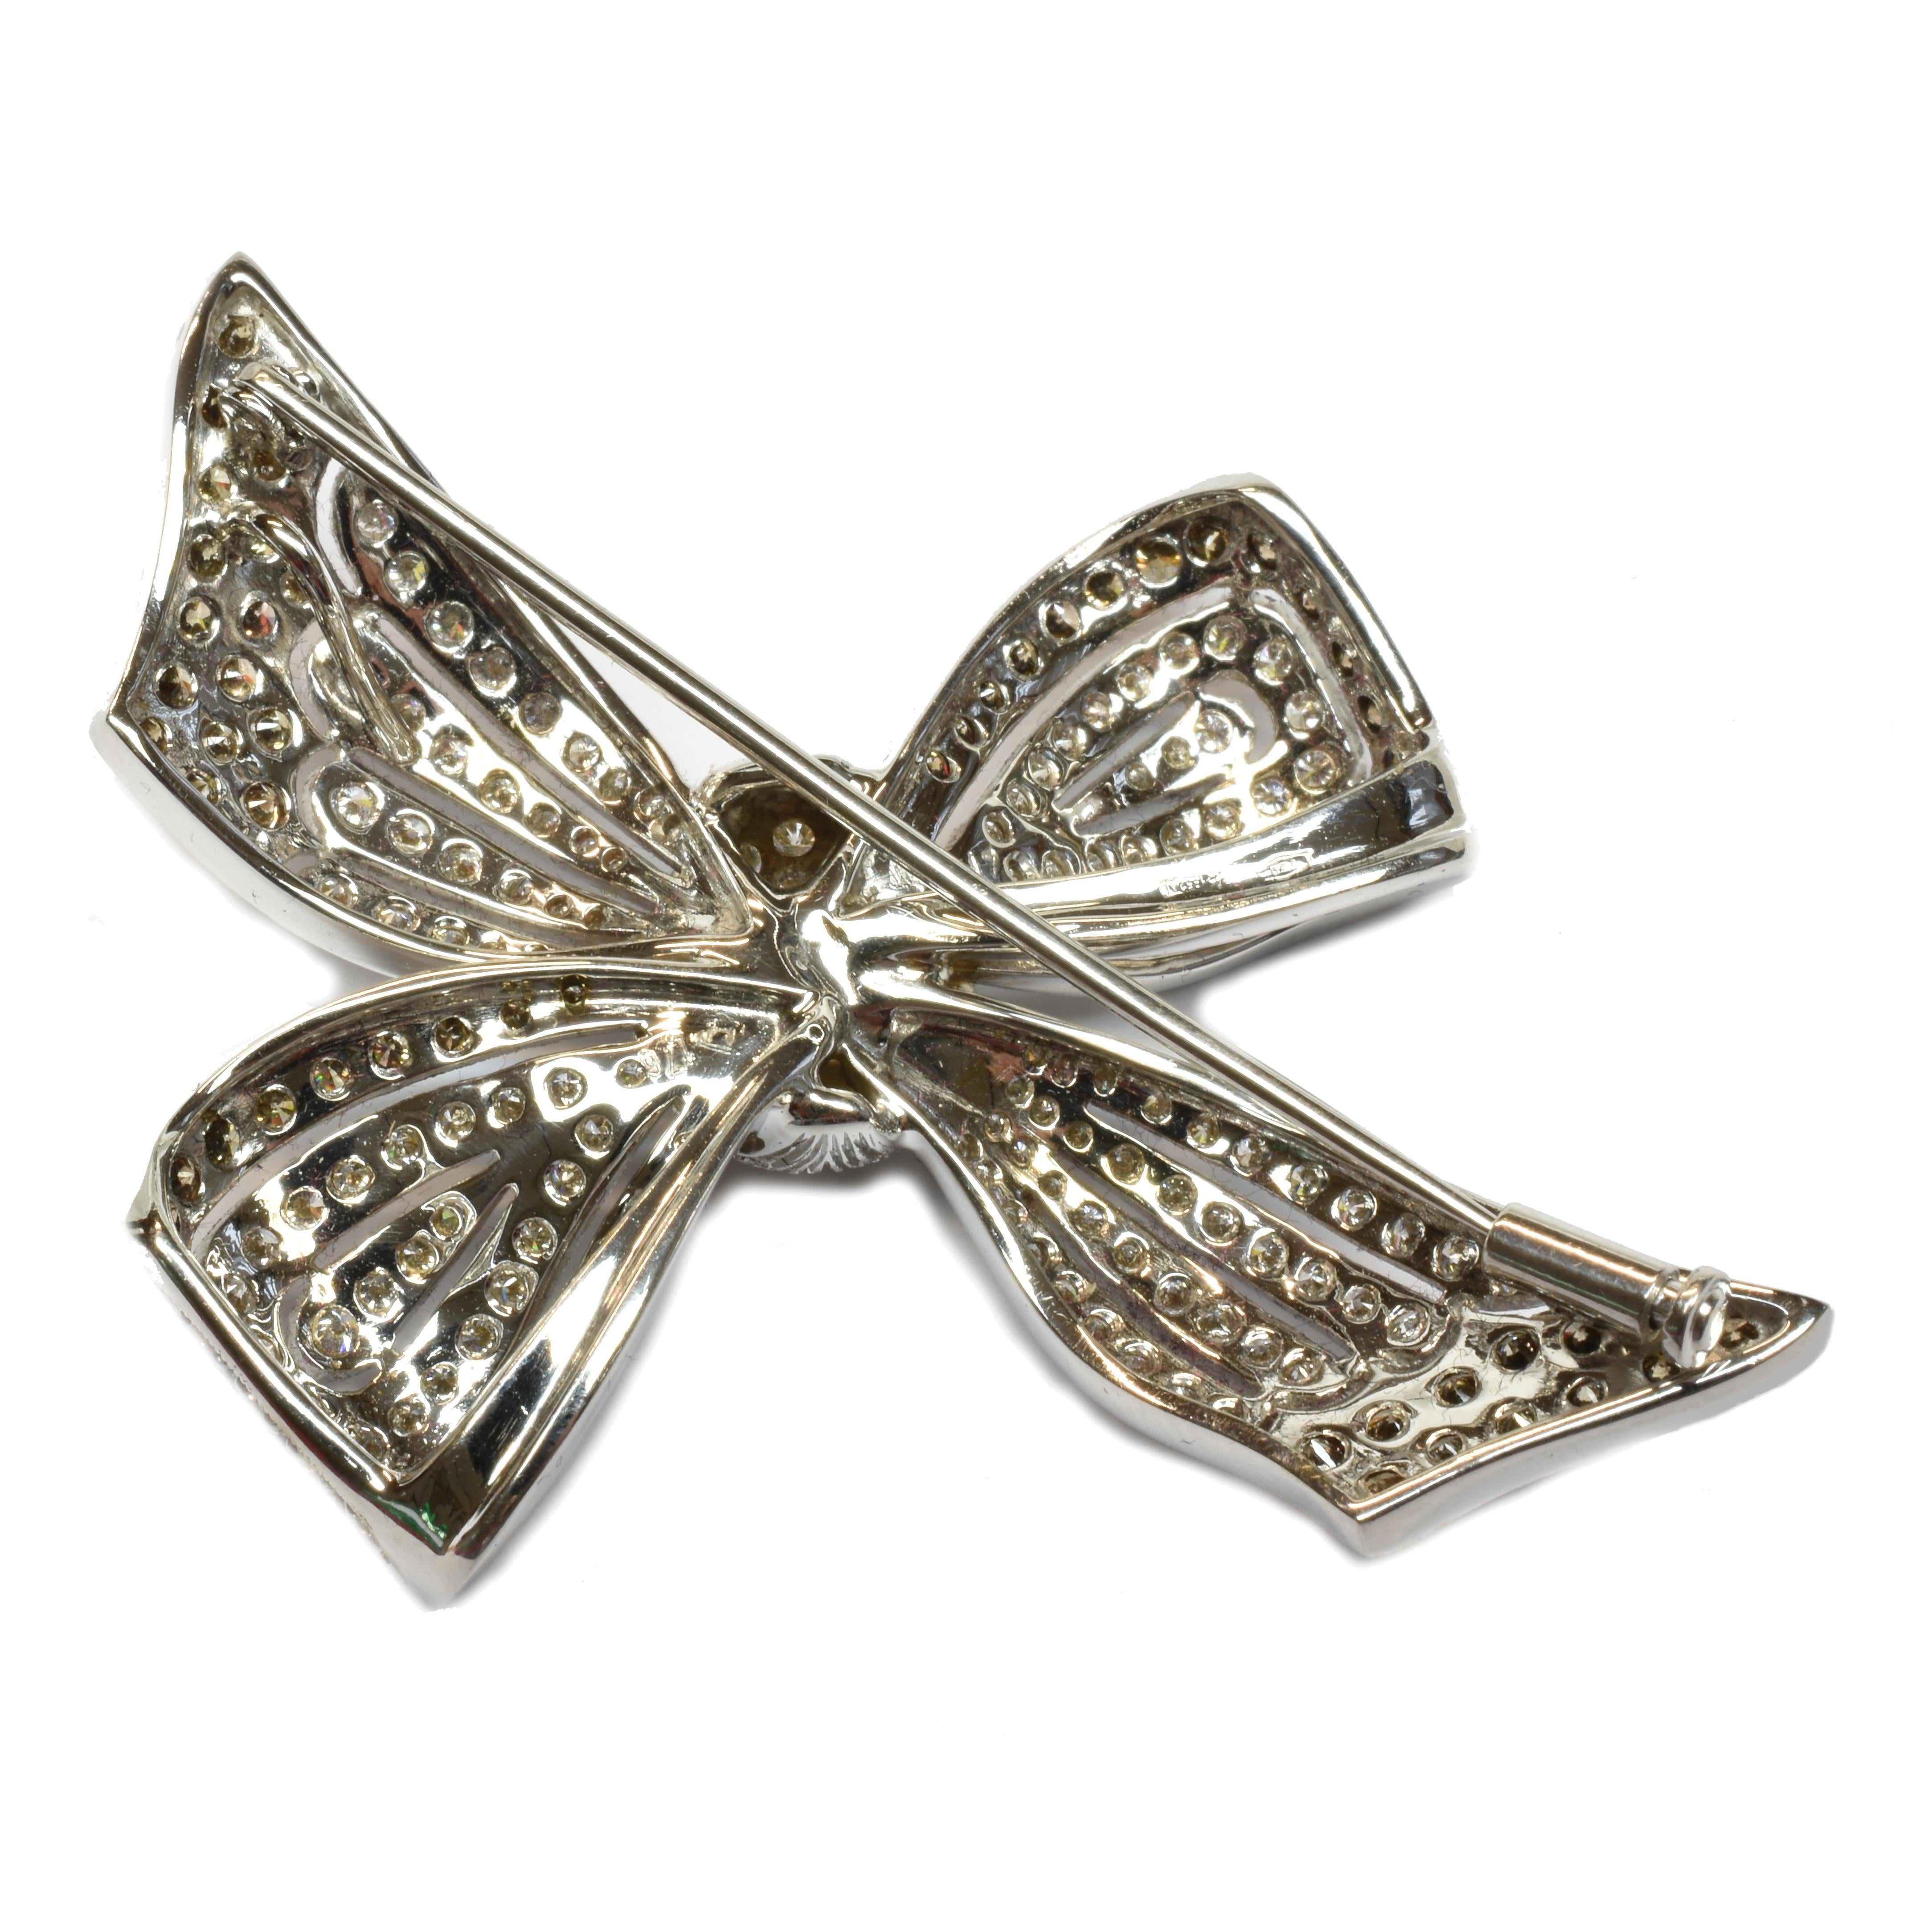 18Kt White Gold Bow Brooch with White and Champagne Diamonds.
One of a Kind Piece. Handmade in our Atelier in Valenza Italy.
This Big and Unique Bow Brooch sports Milgrain Settings for a very elegant timeless look.
Black Rhodium under the Champagne